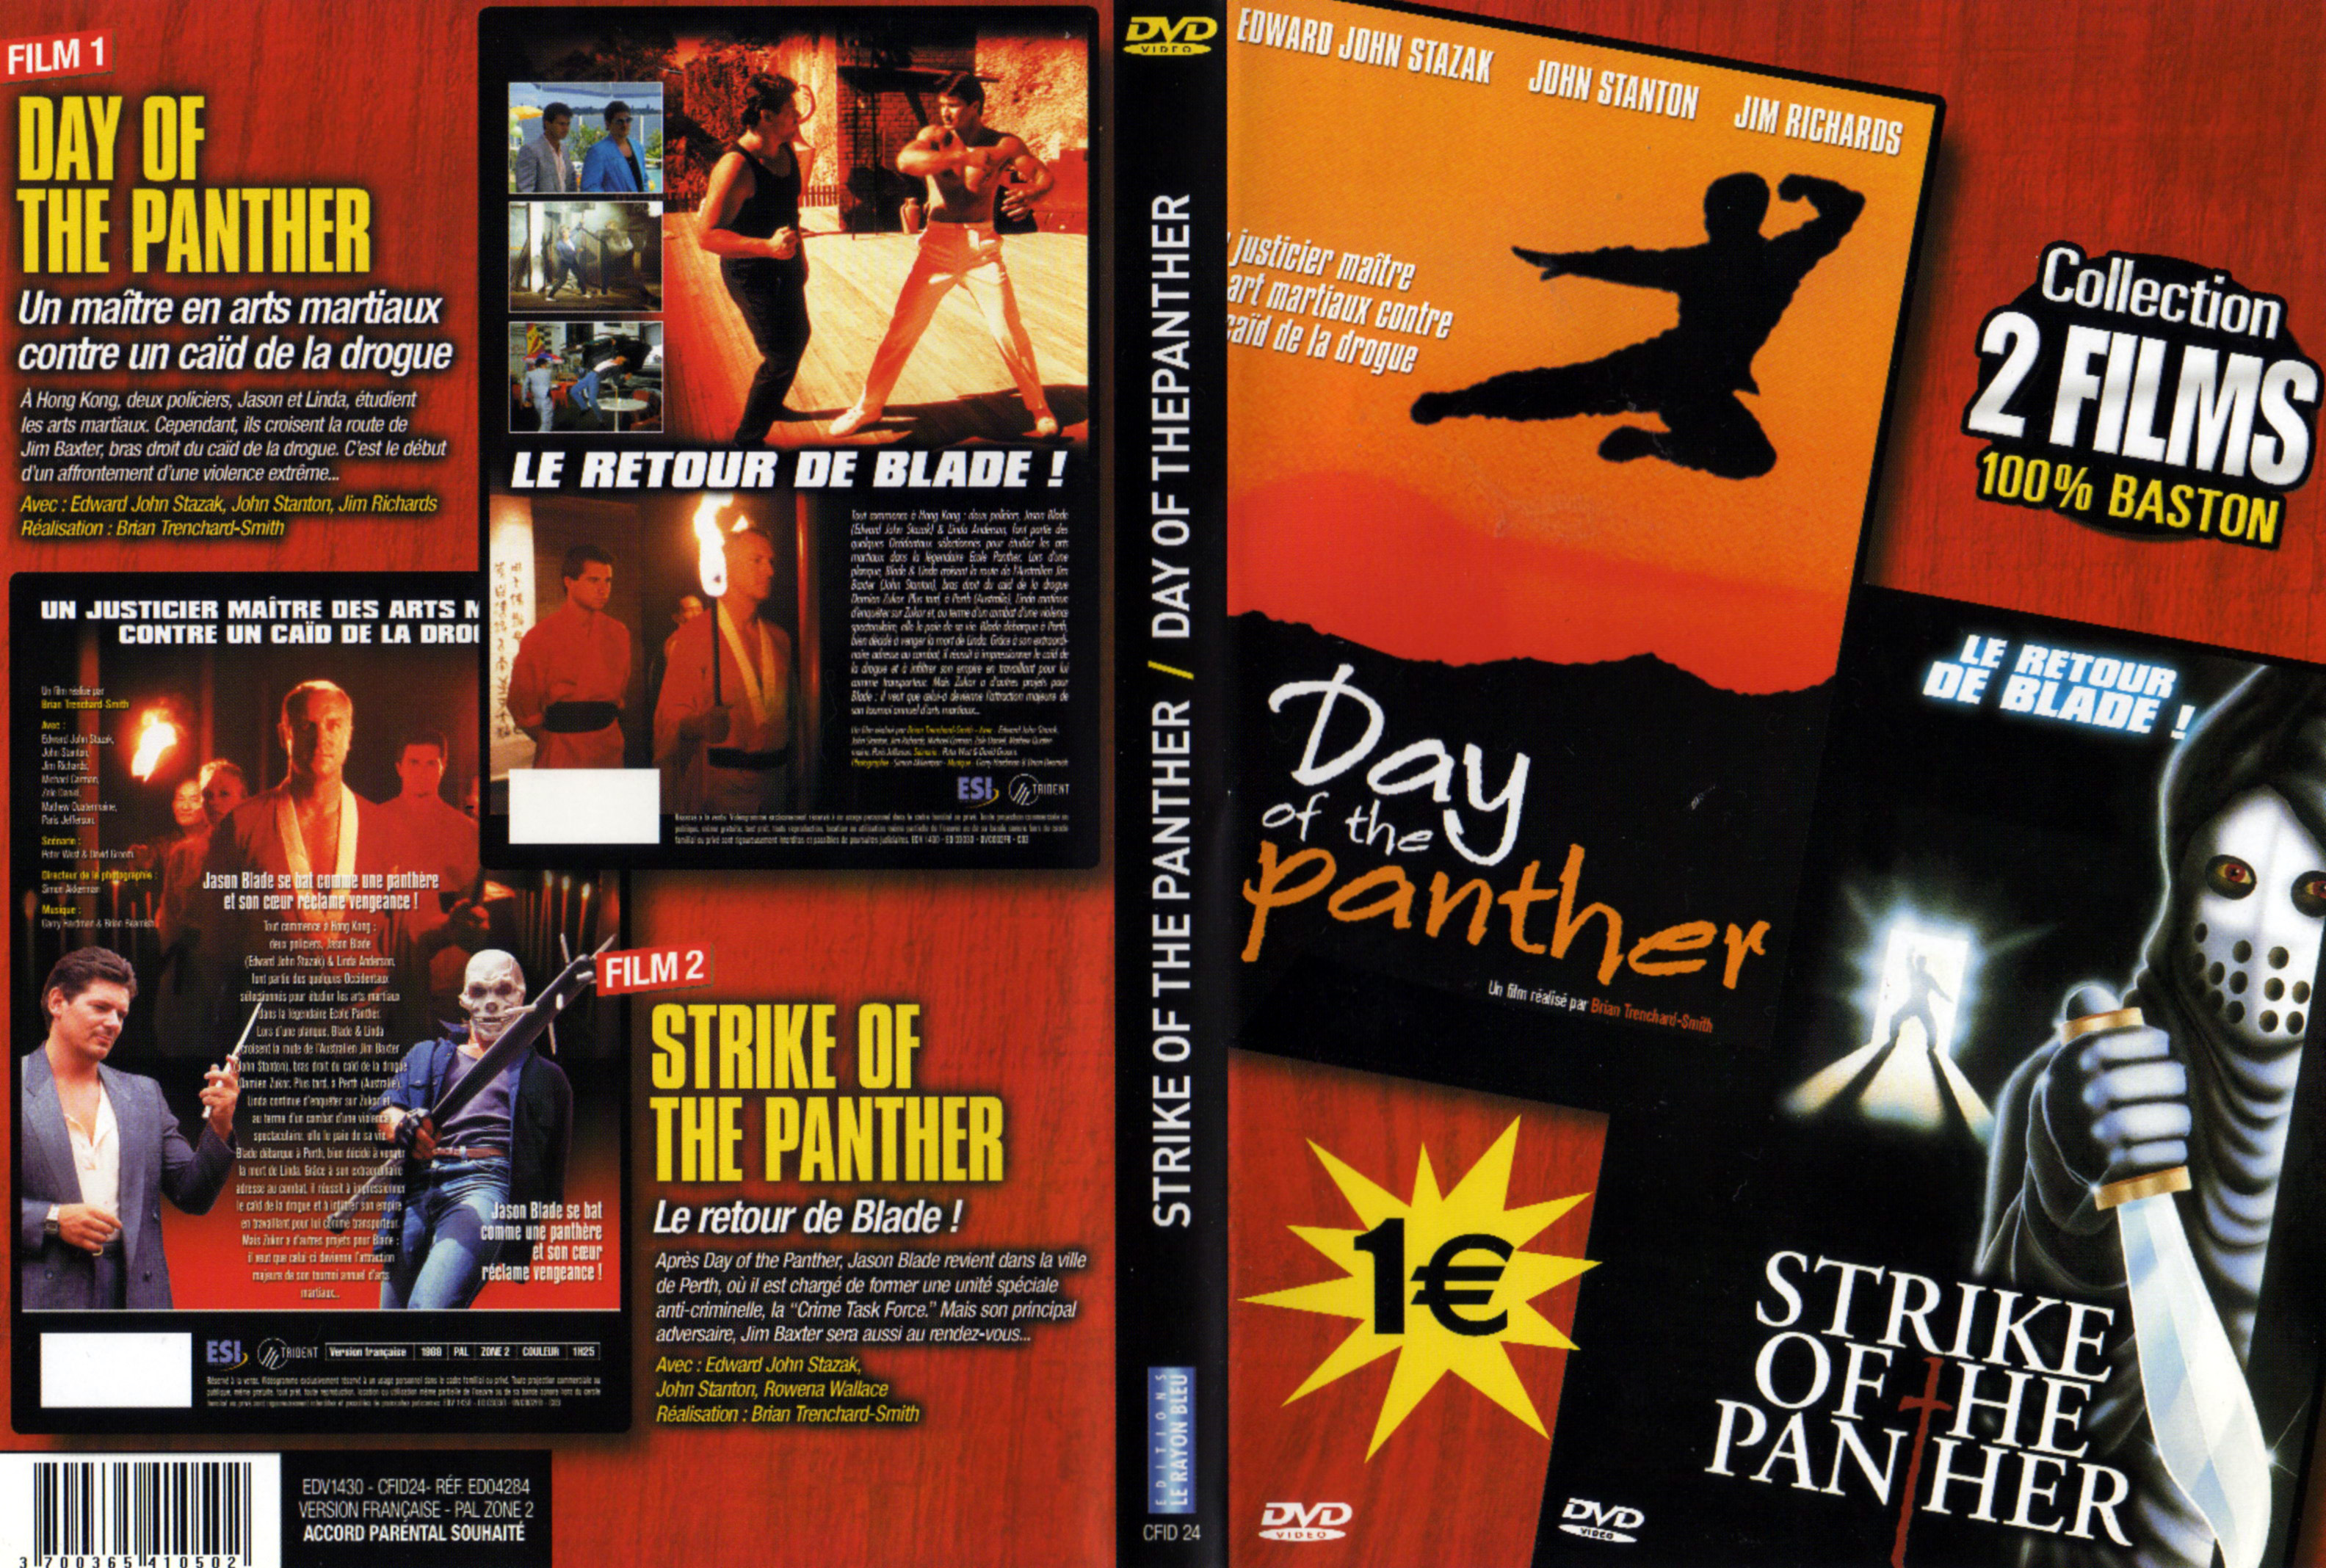 Jaquette DVD Day of the Panther - Strike of the Panther